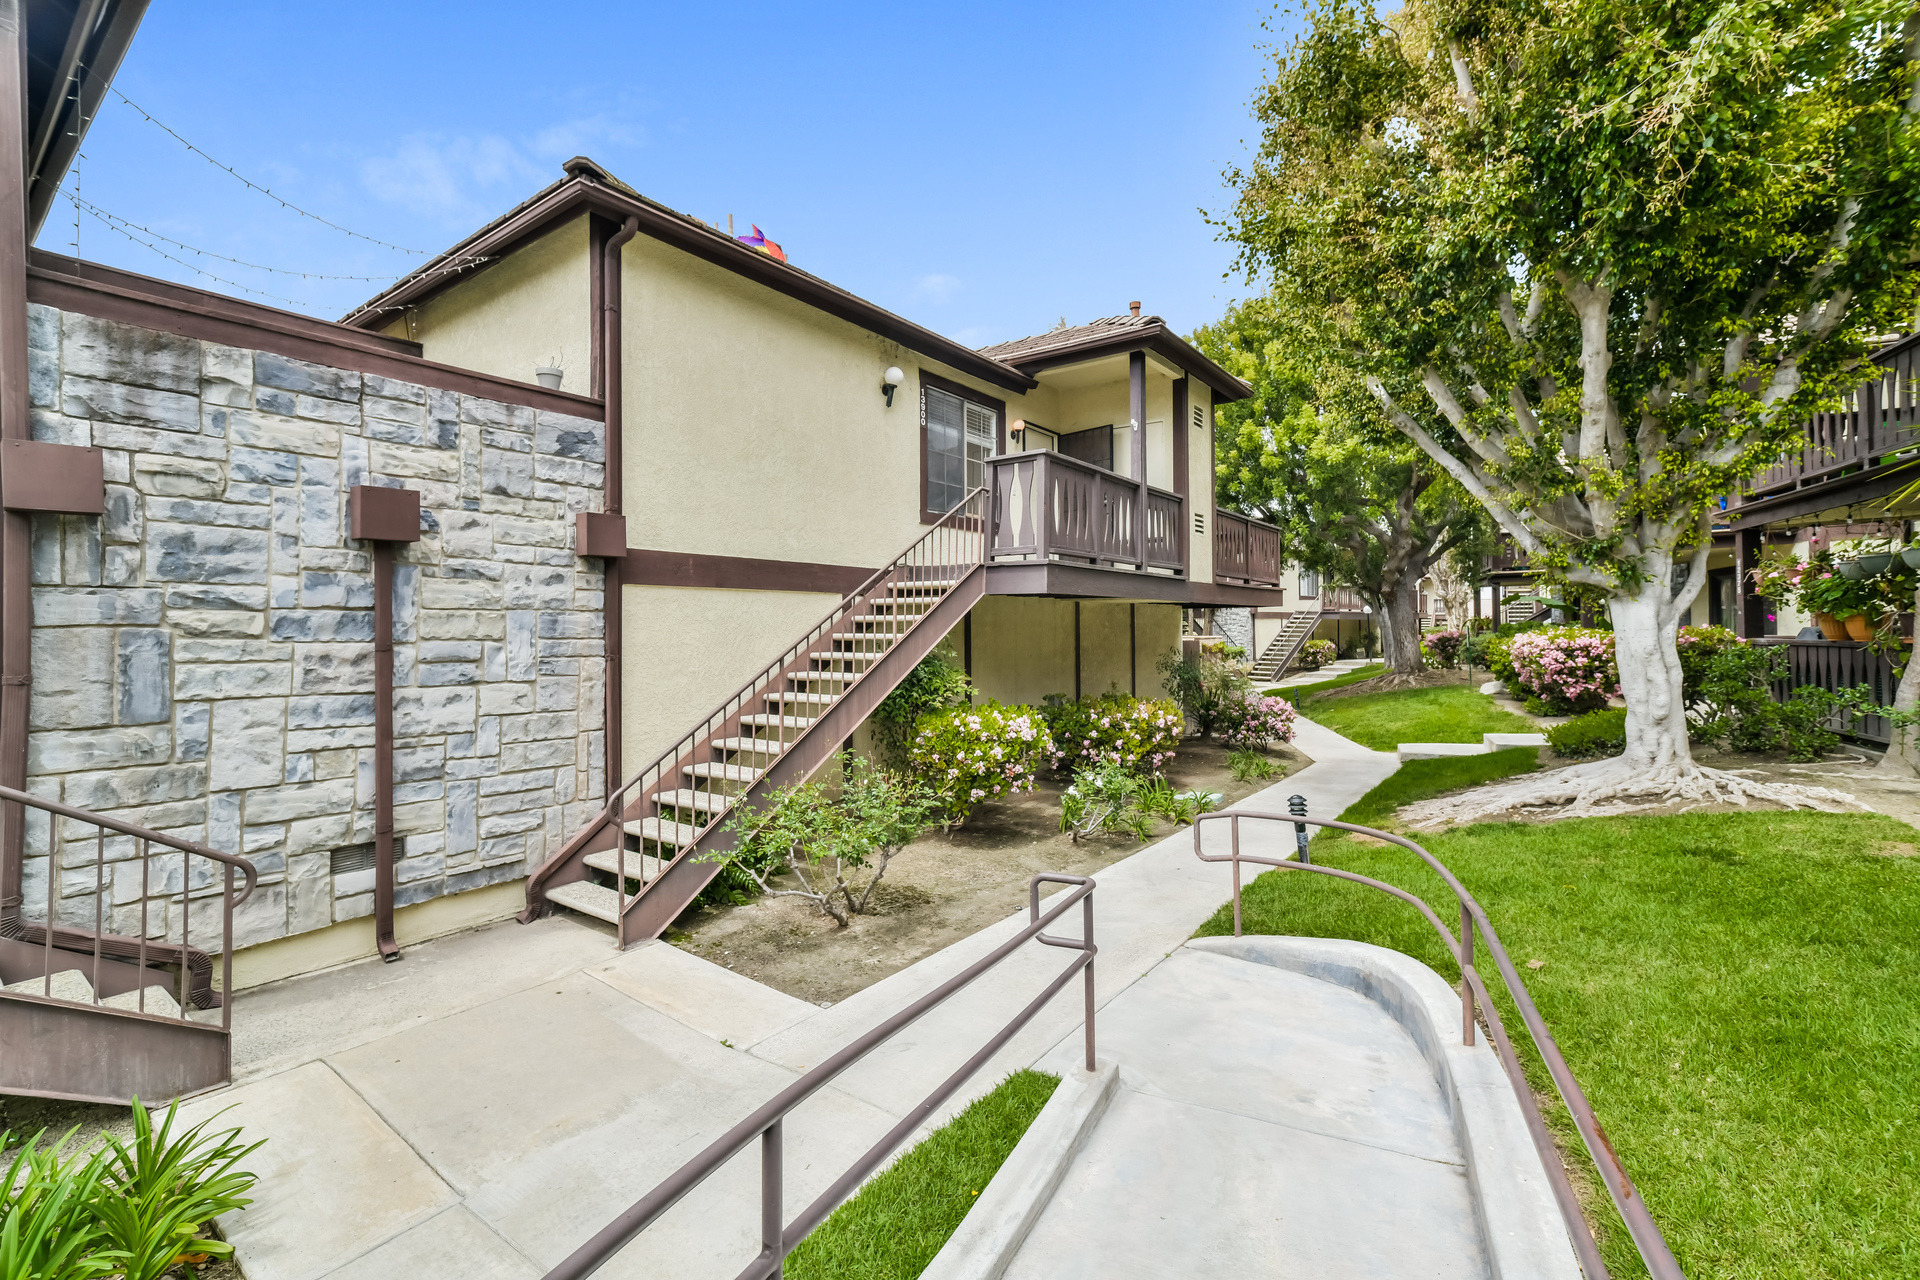 Beautiful Buena Park, CA house showcasing the best property management services